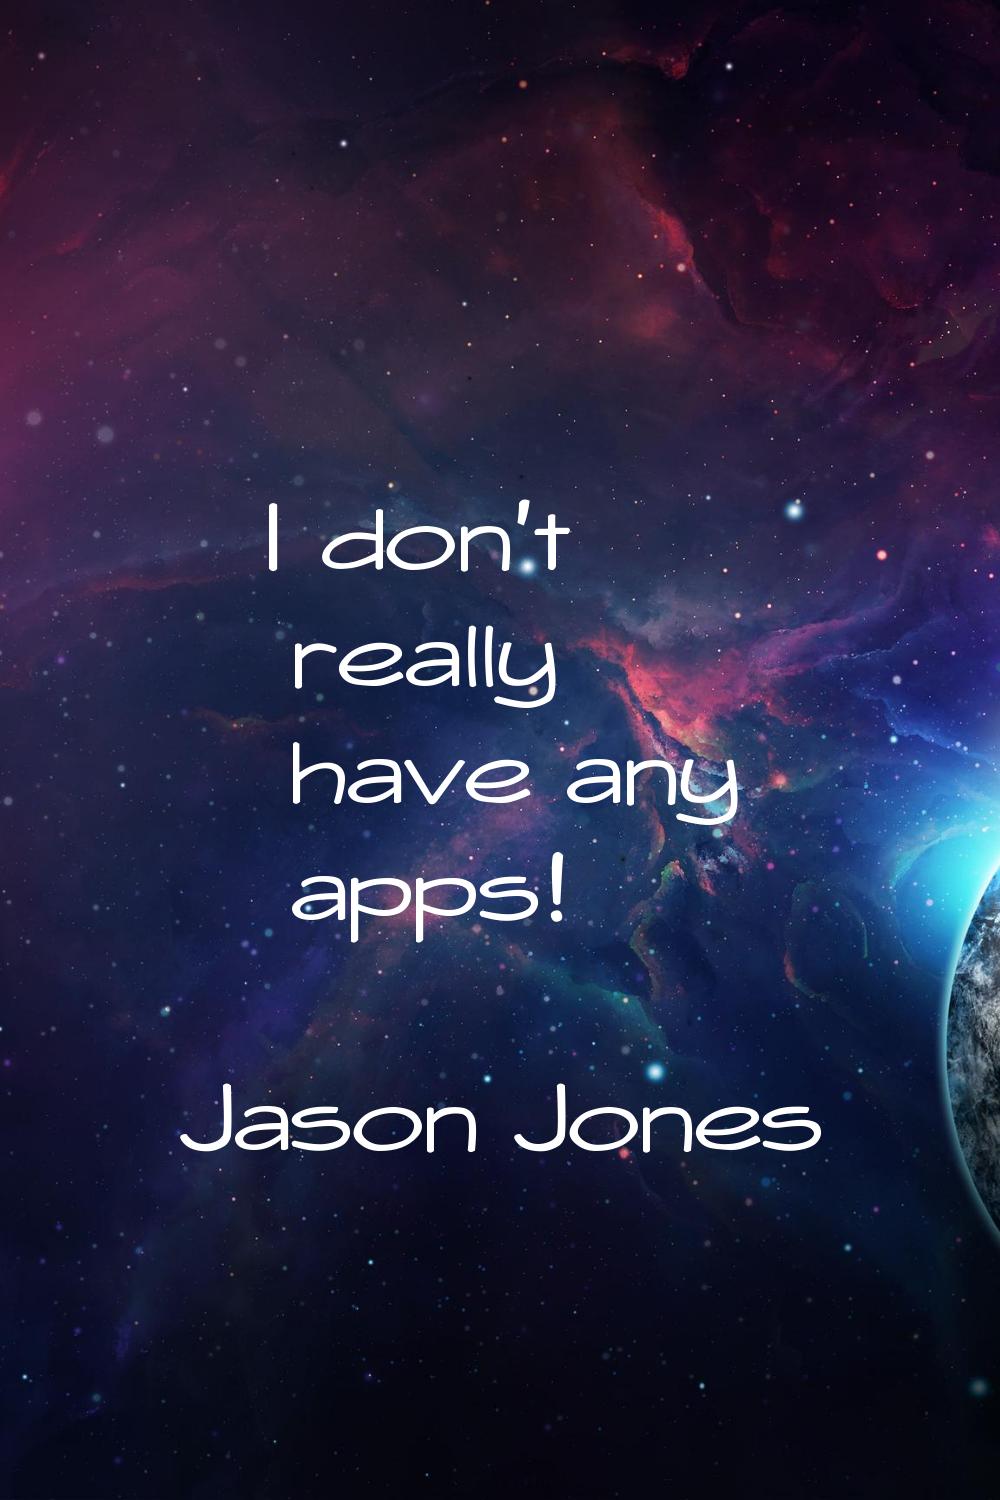 I don't really have any apps!